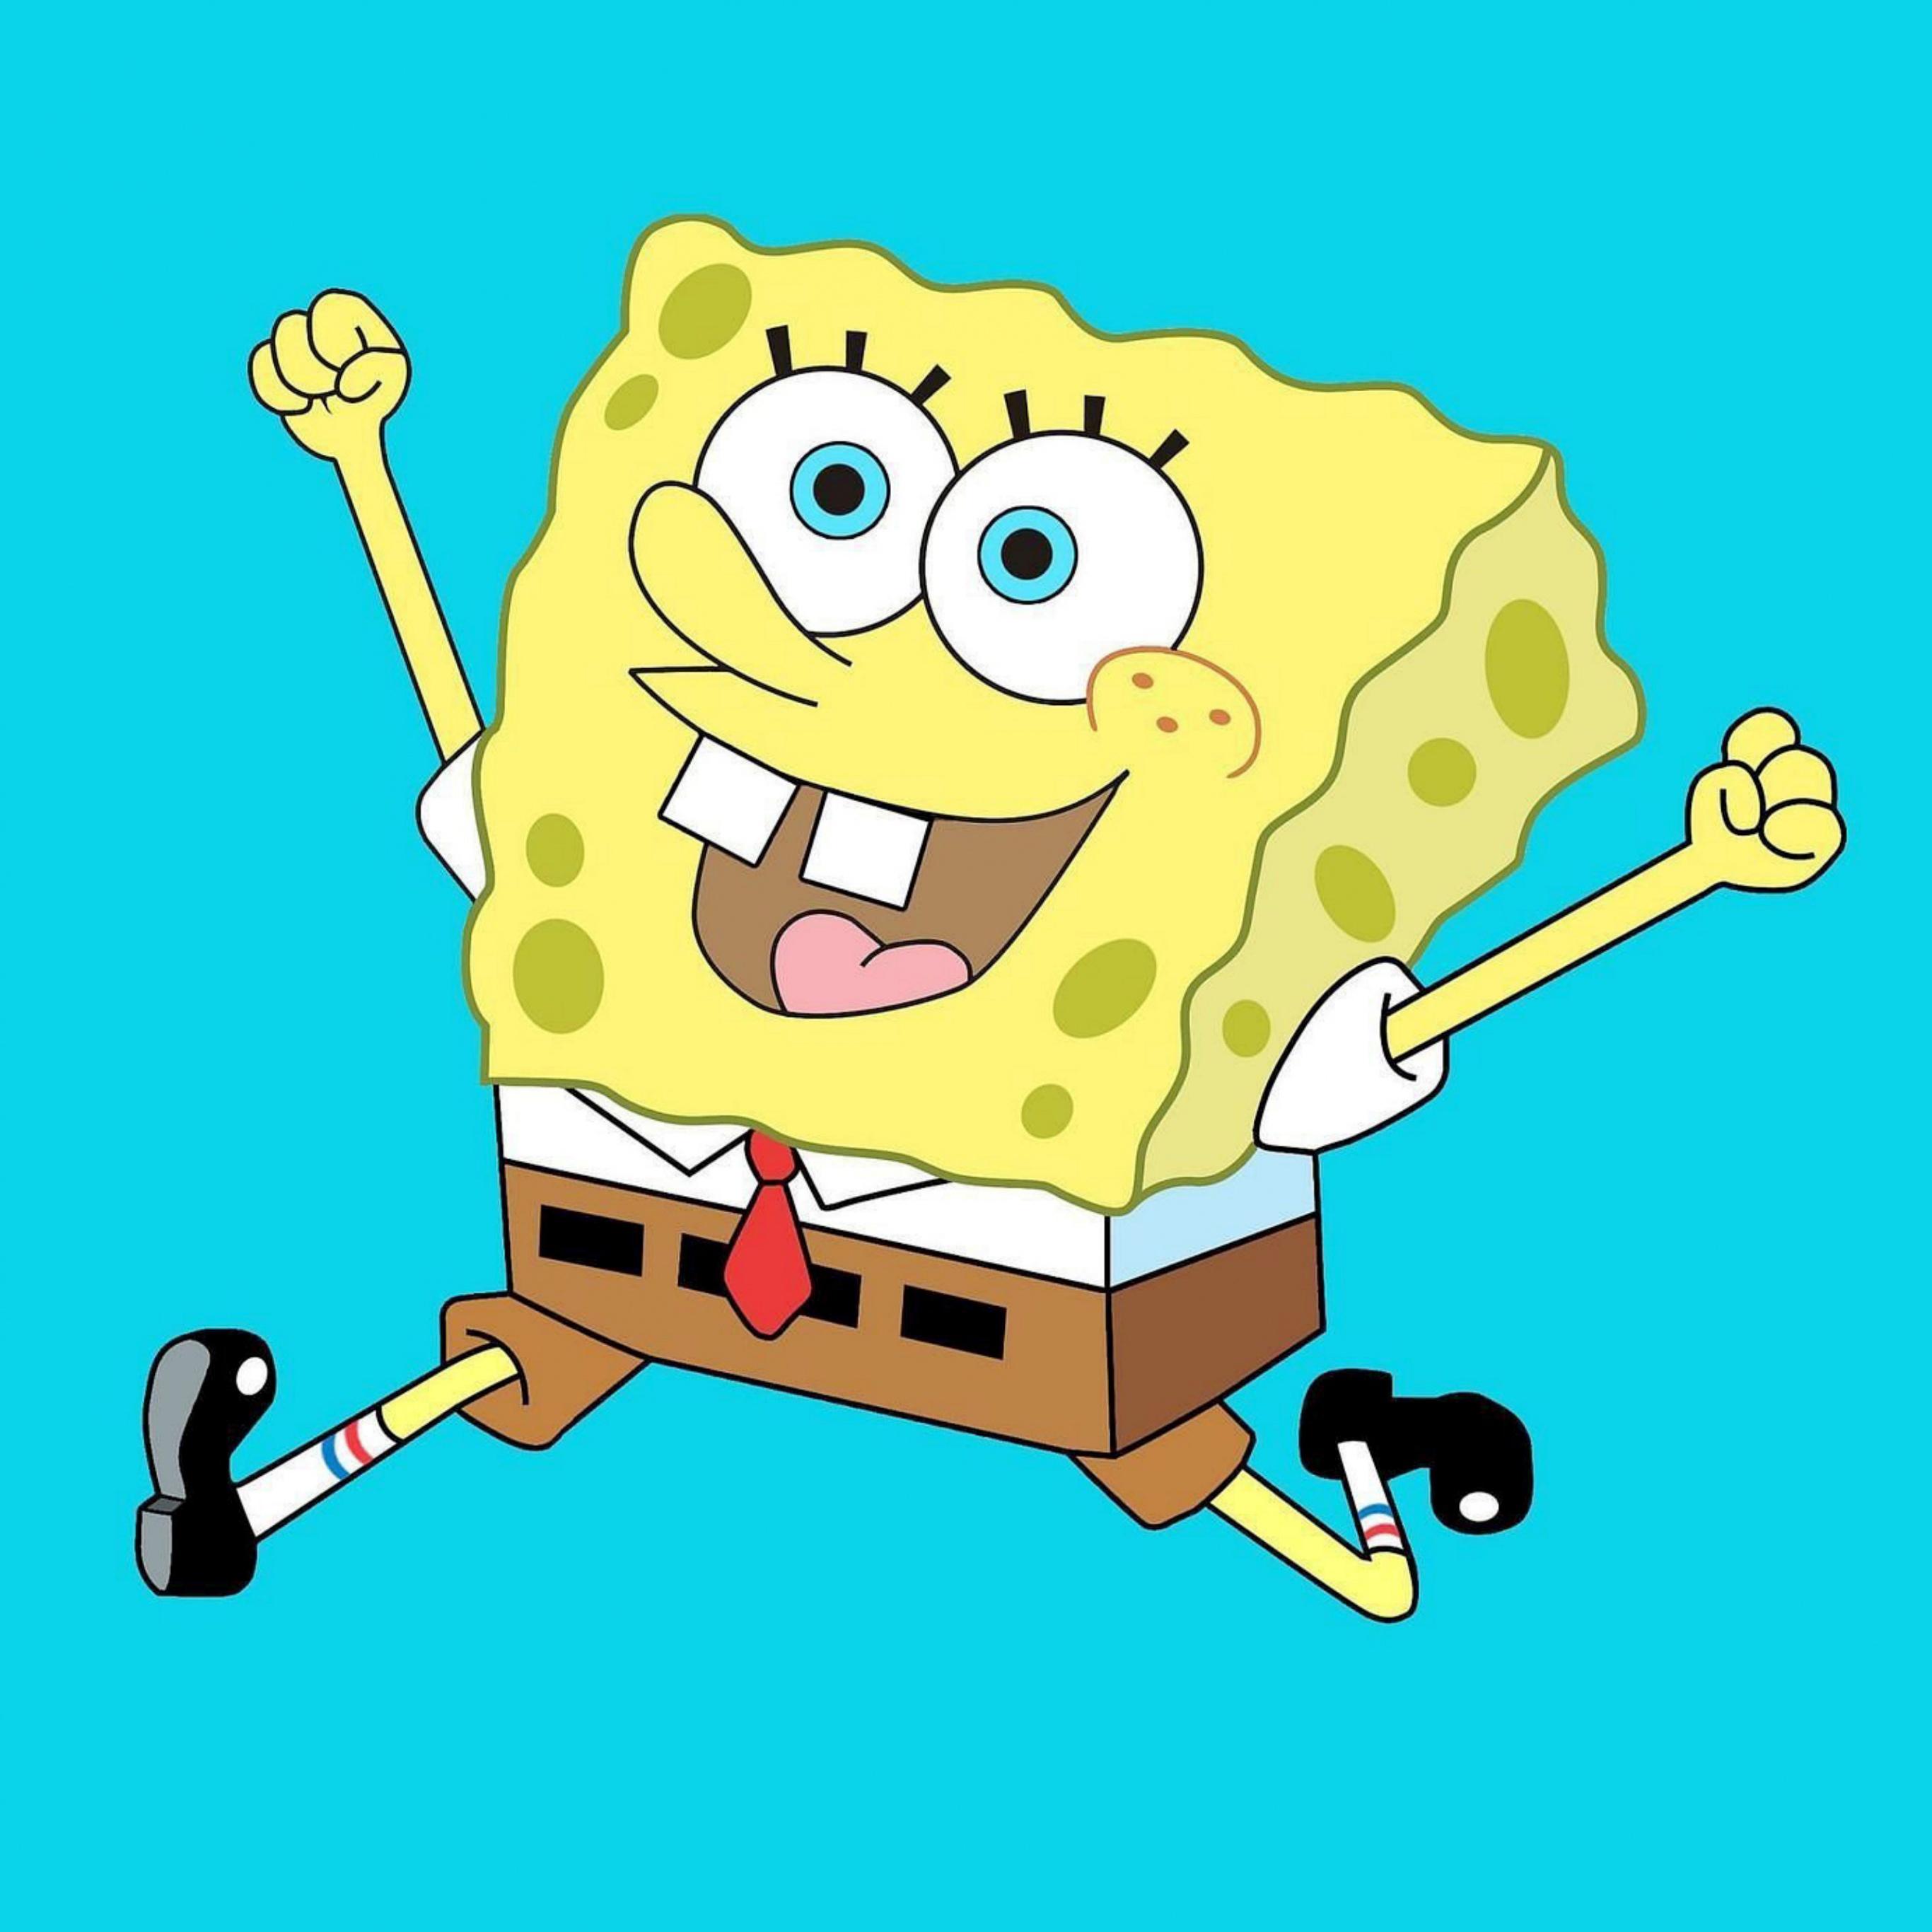 Share more than 75 background spongebob wallpaper - in.cdgdbentre